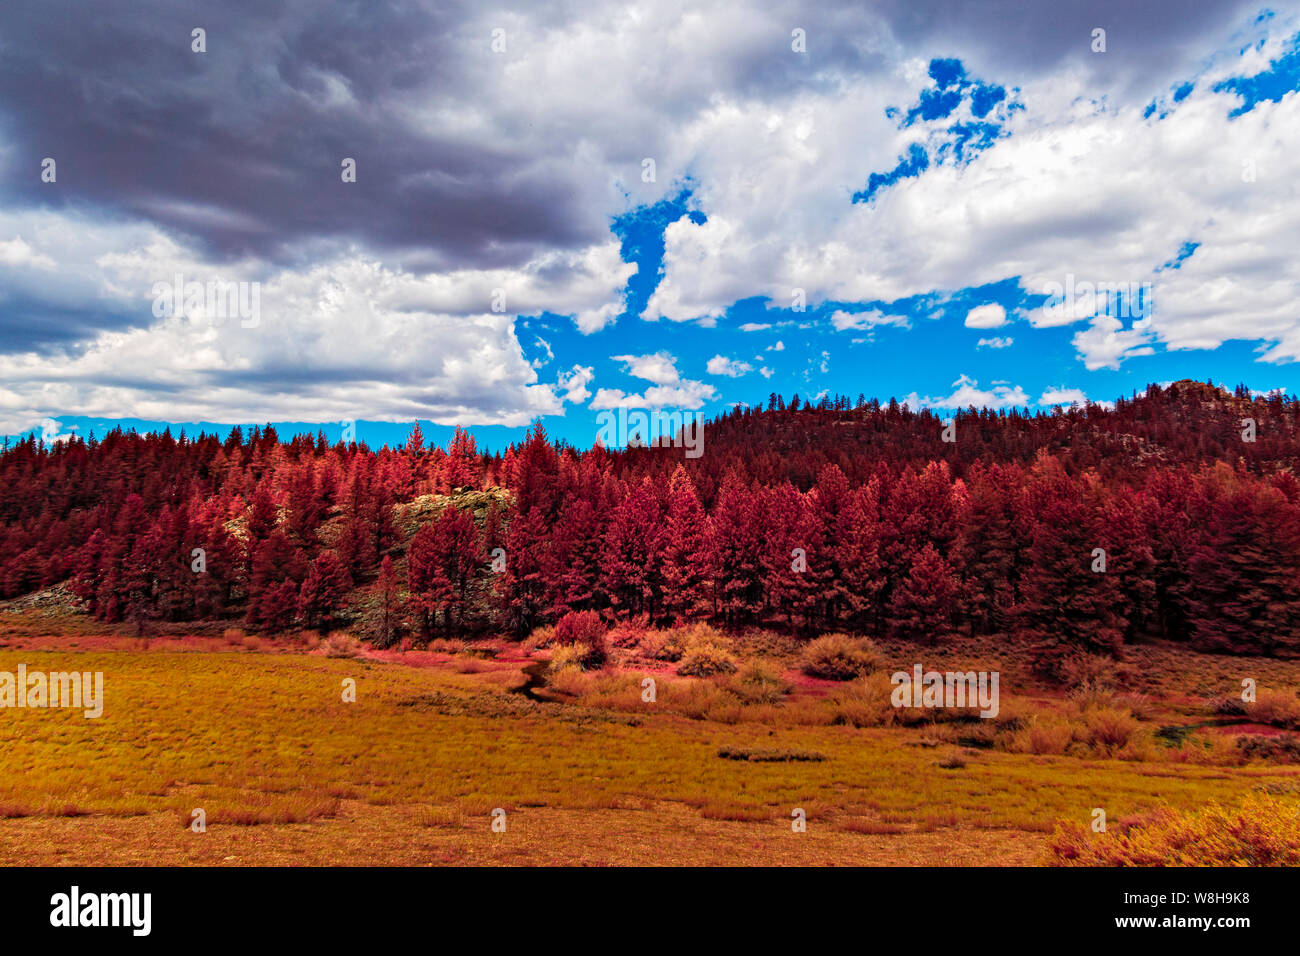 Autumn mountain meadows with fall colored trees under blue skies with white clouds. Stock Photo